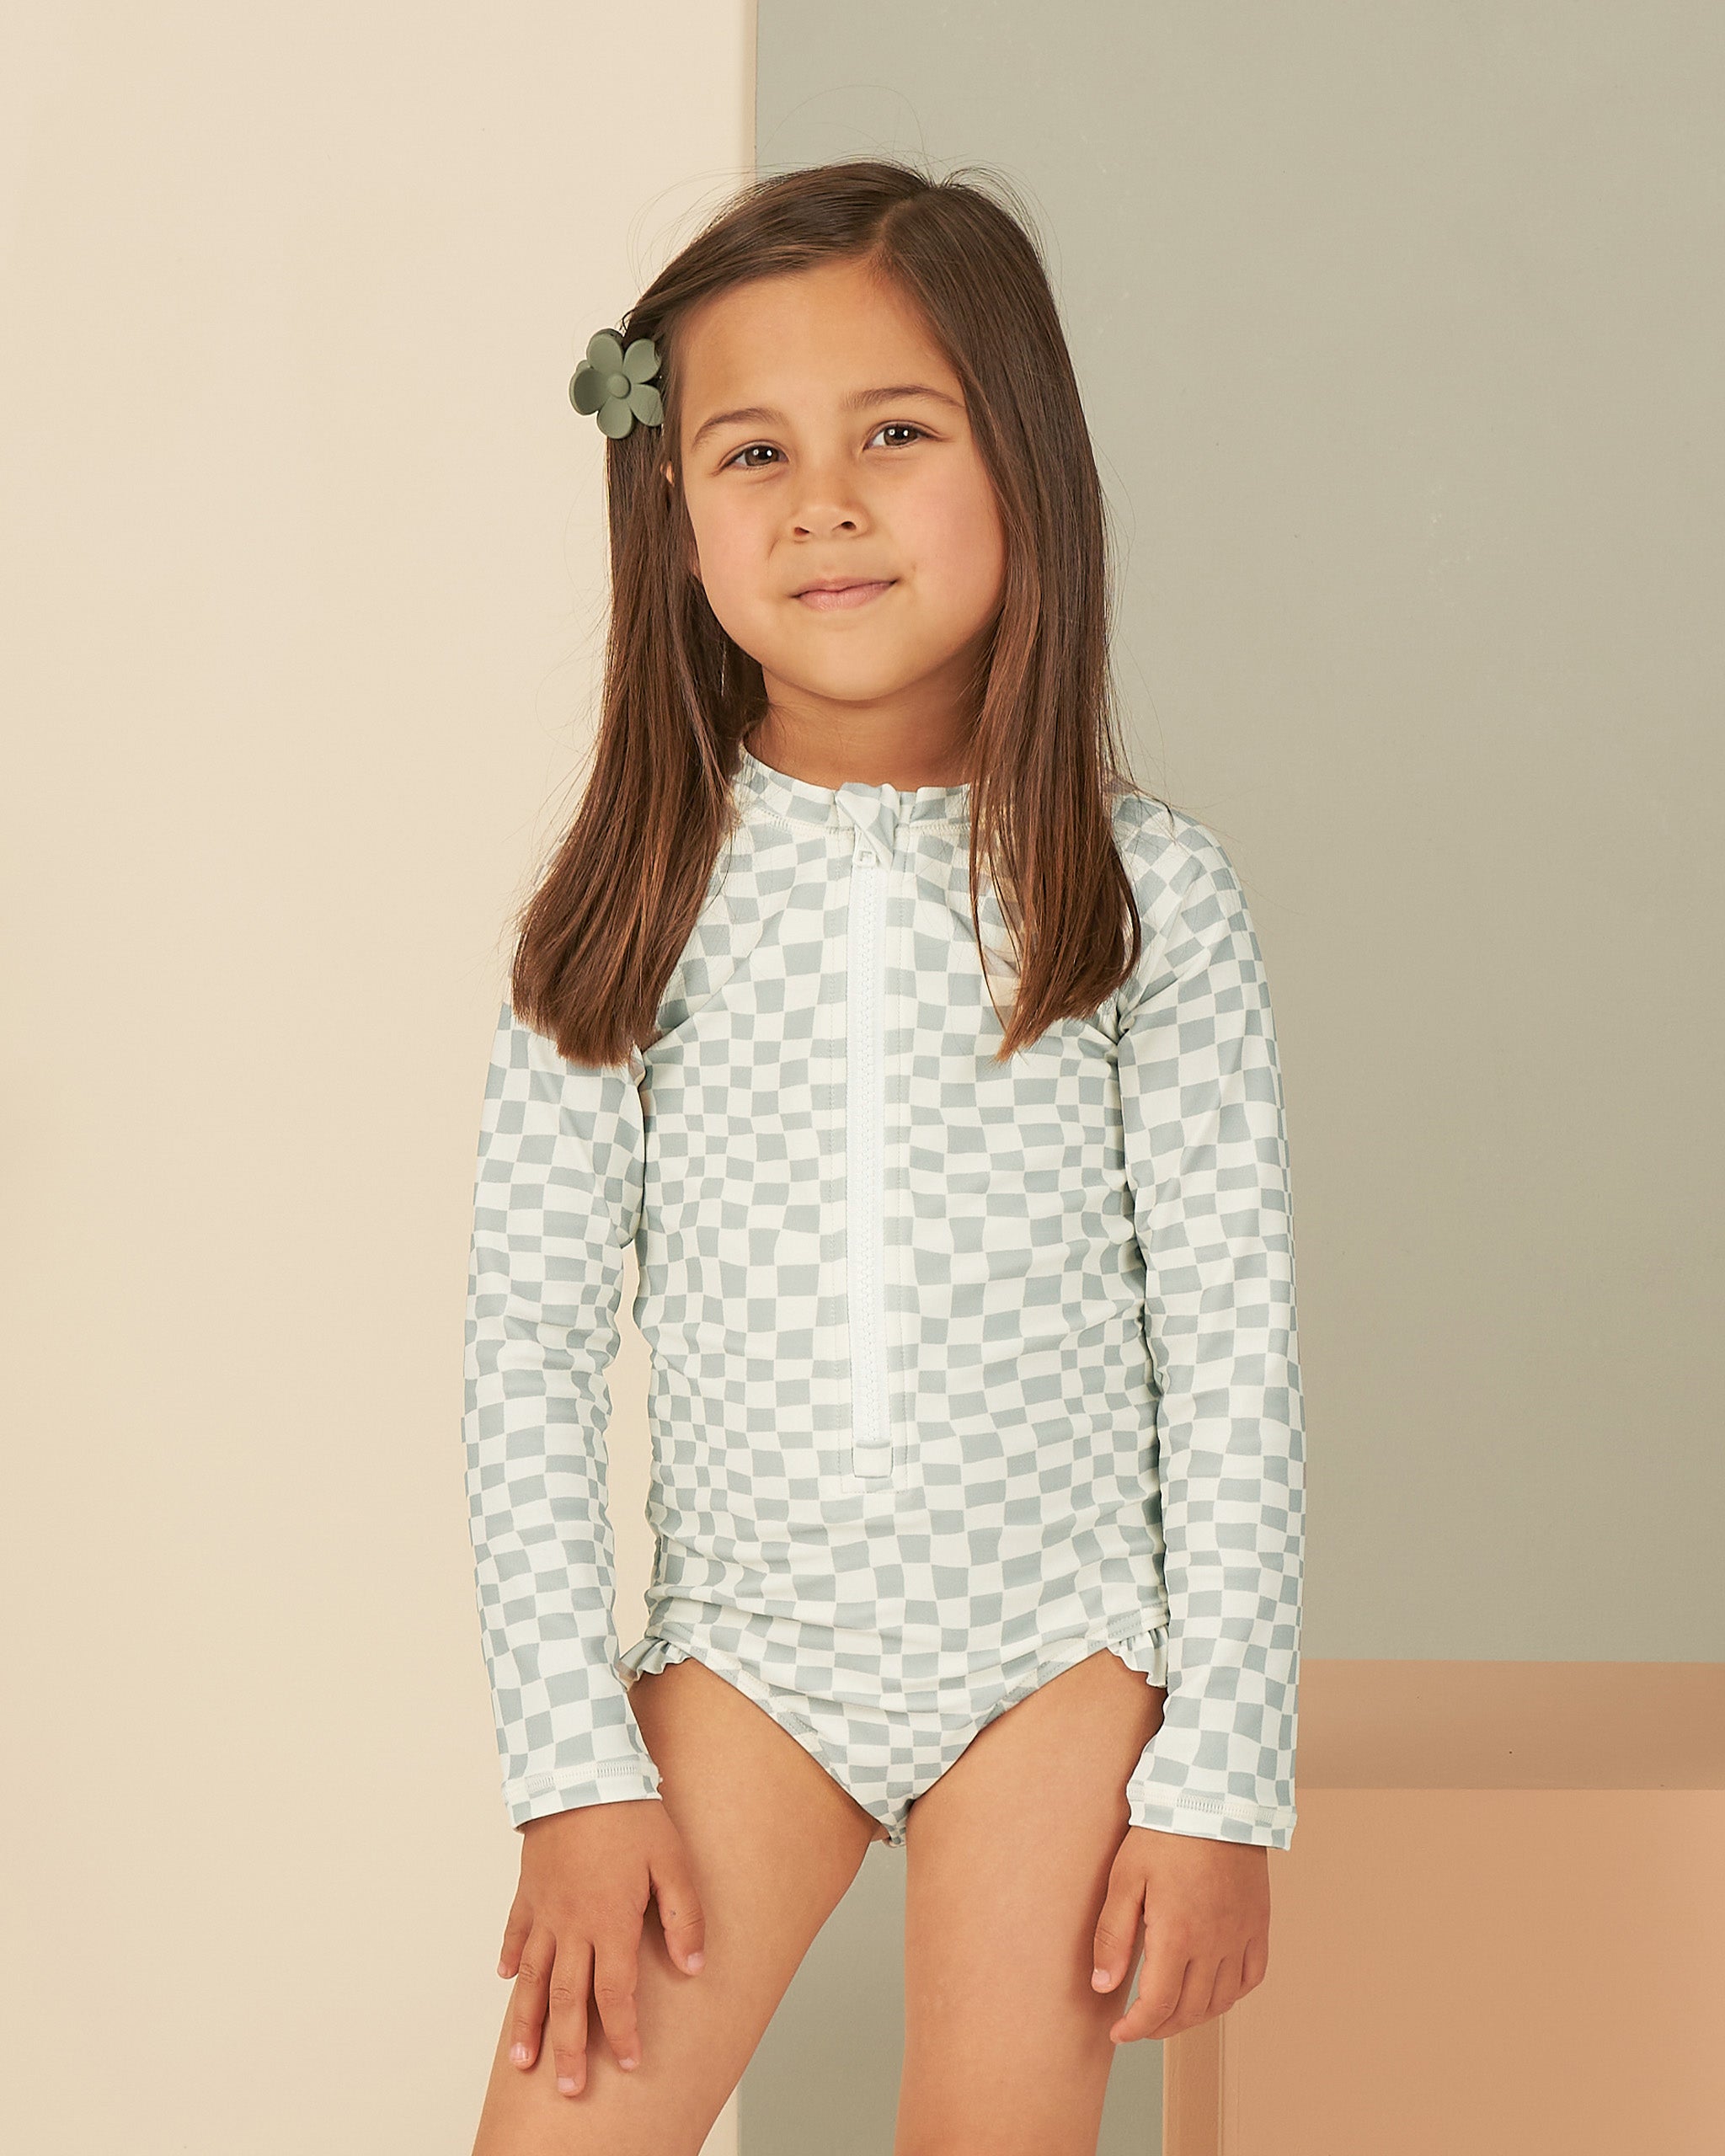 Rash Guard One-Piece || Seafoam Check - Rylee + Cru | Kids Clothes | Trendy Baby Clothes | Modern Infant Outfits |